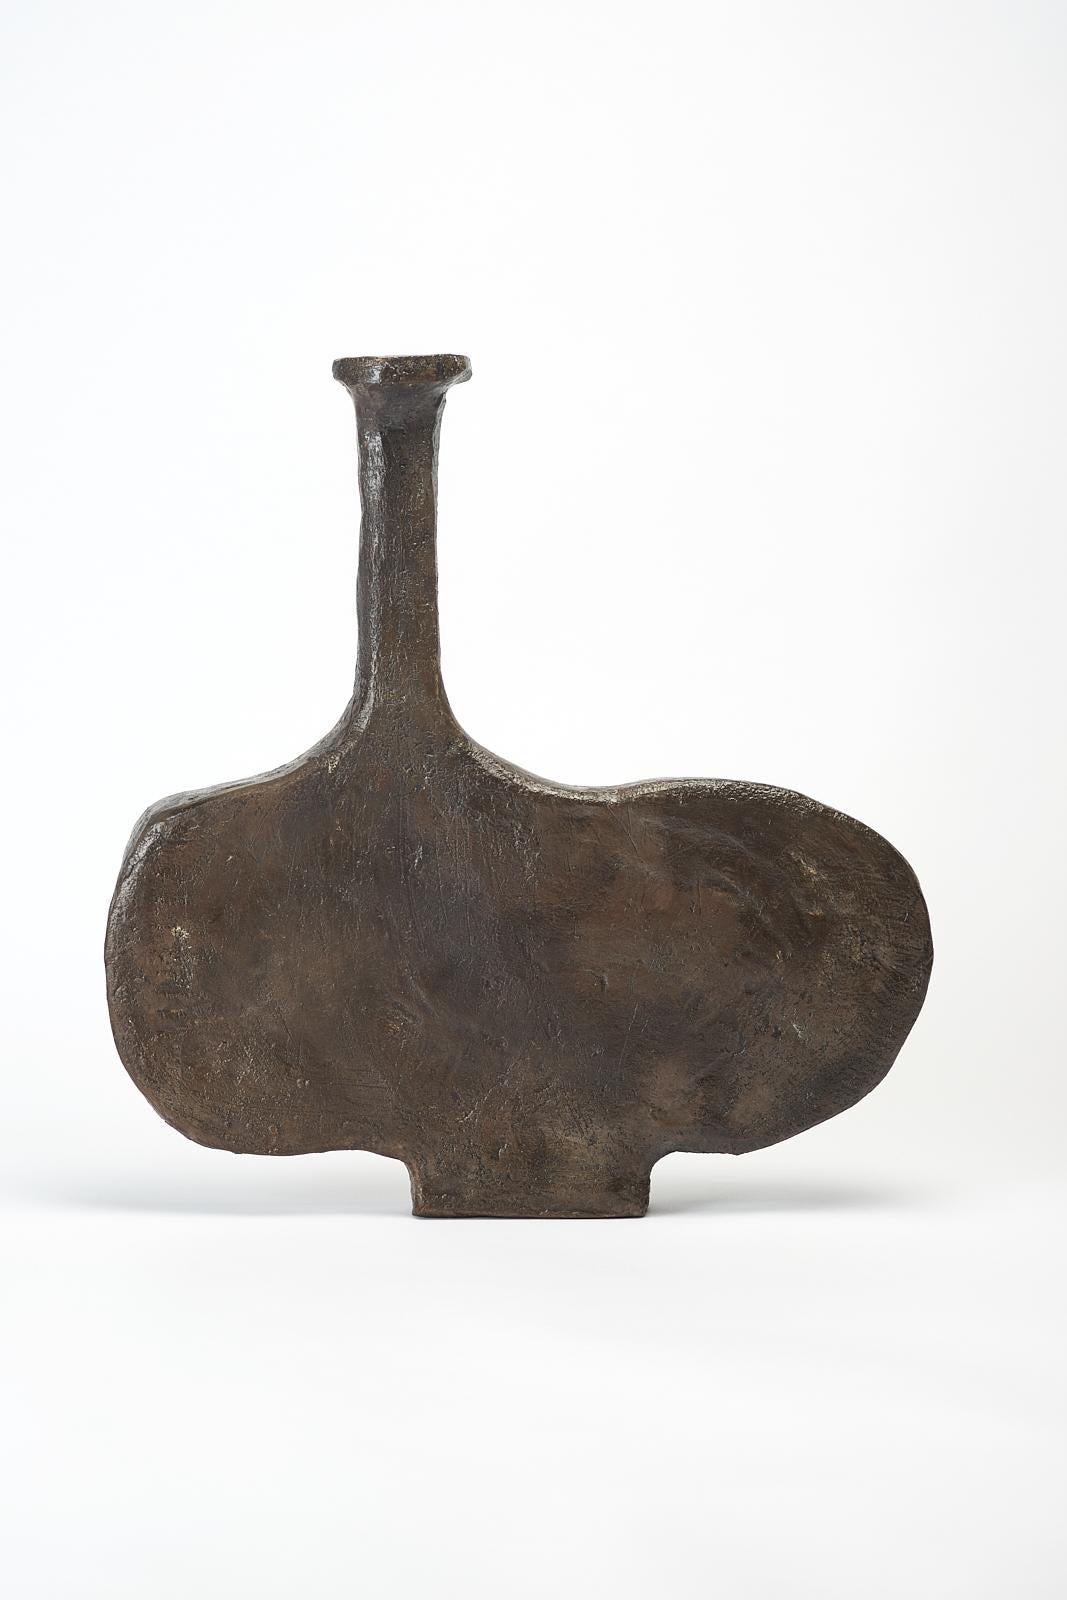 Dege Vase by Willem Van Hooff
Core Vessel Series
Dimensions: W 41 x D 10 x H 43 cm (Dimensions may vary as pieces are hand-made and might present slight variations in sizes)
Materials: Earthenware, ceramic, pigments, glaze.

Core is a series of flat